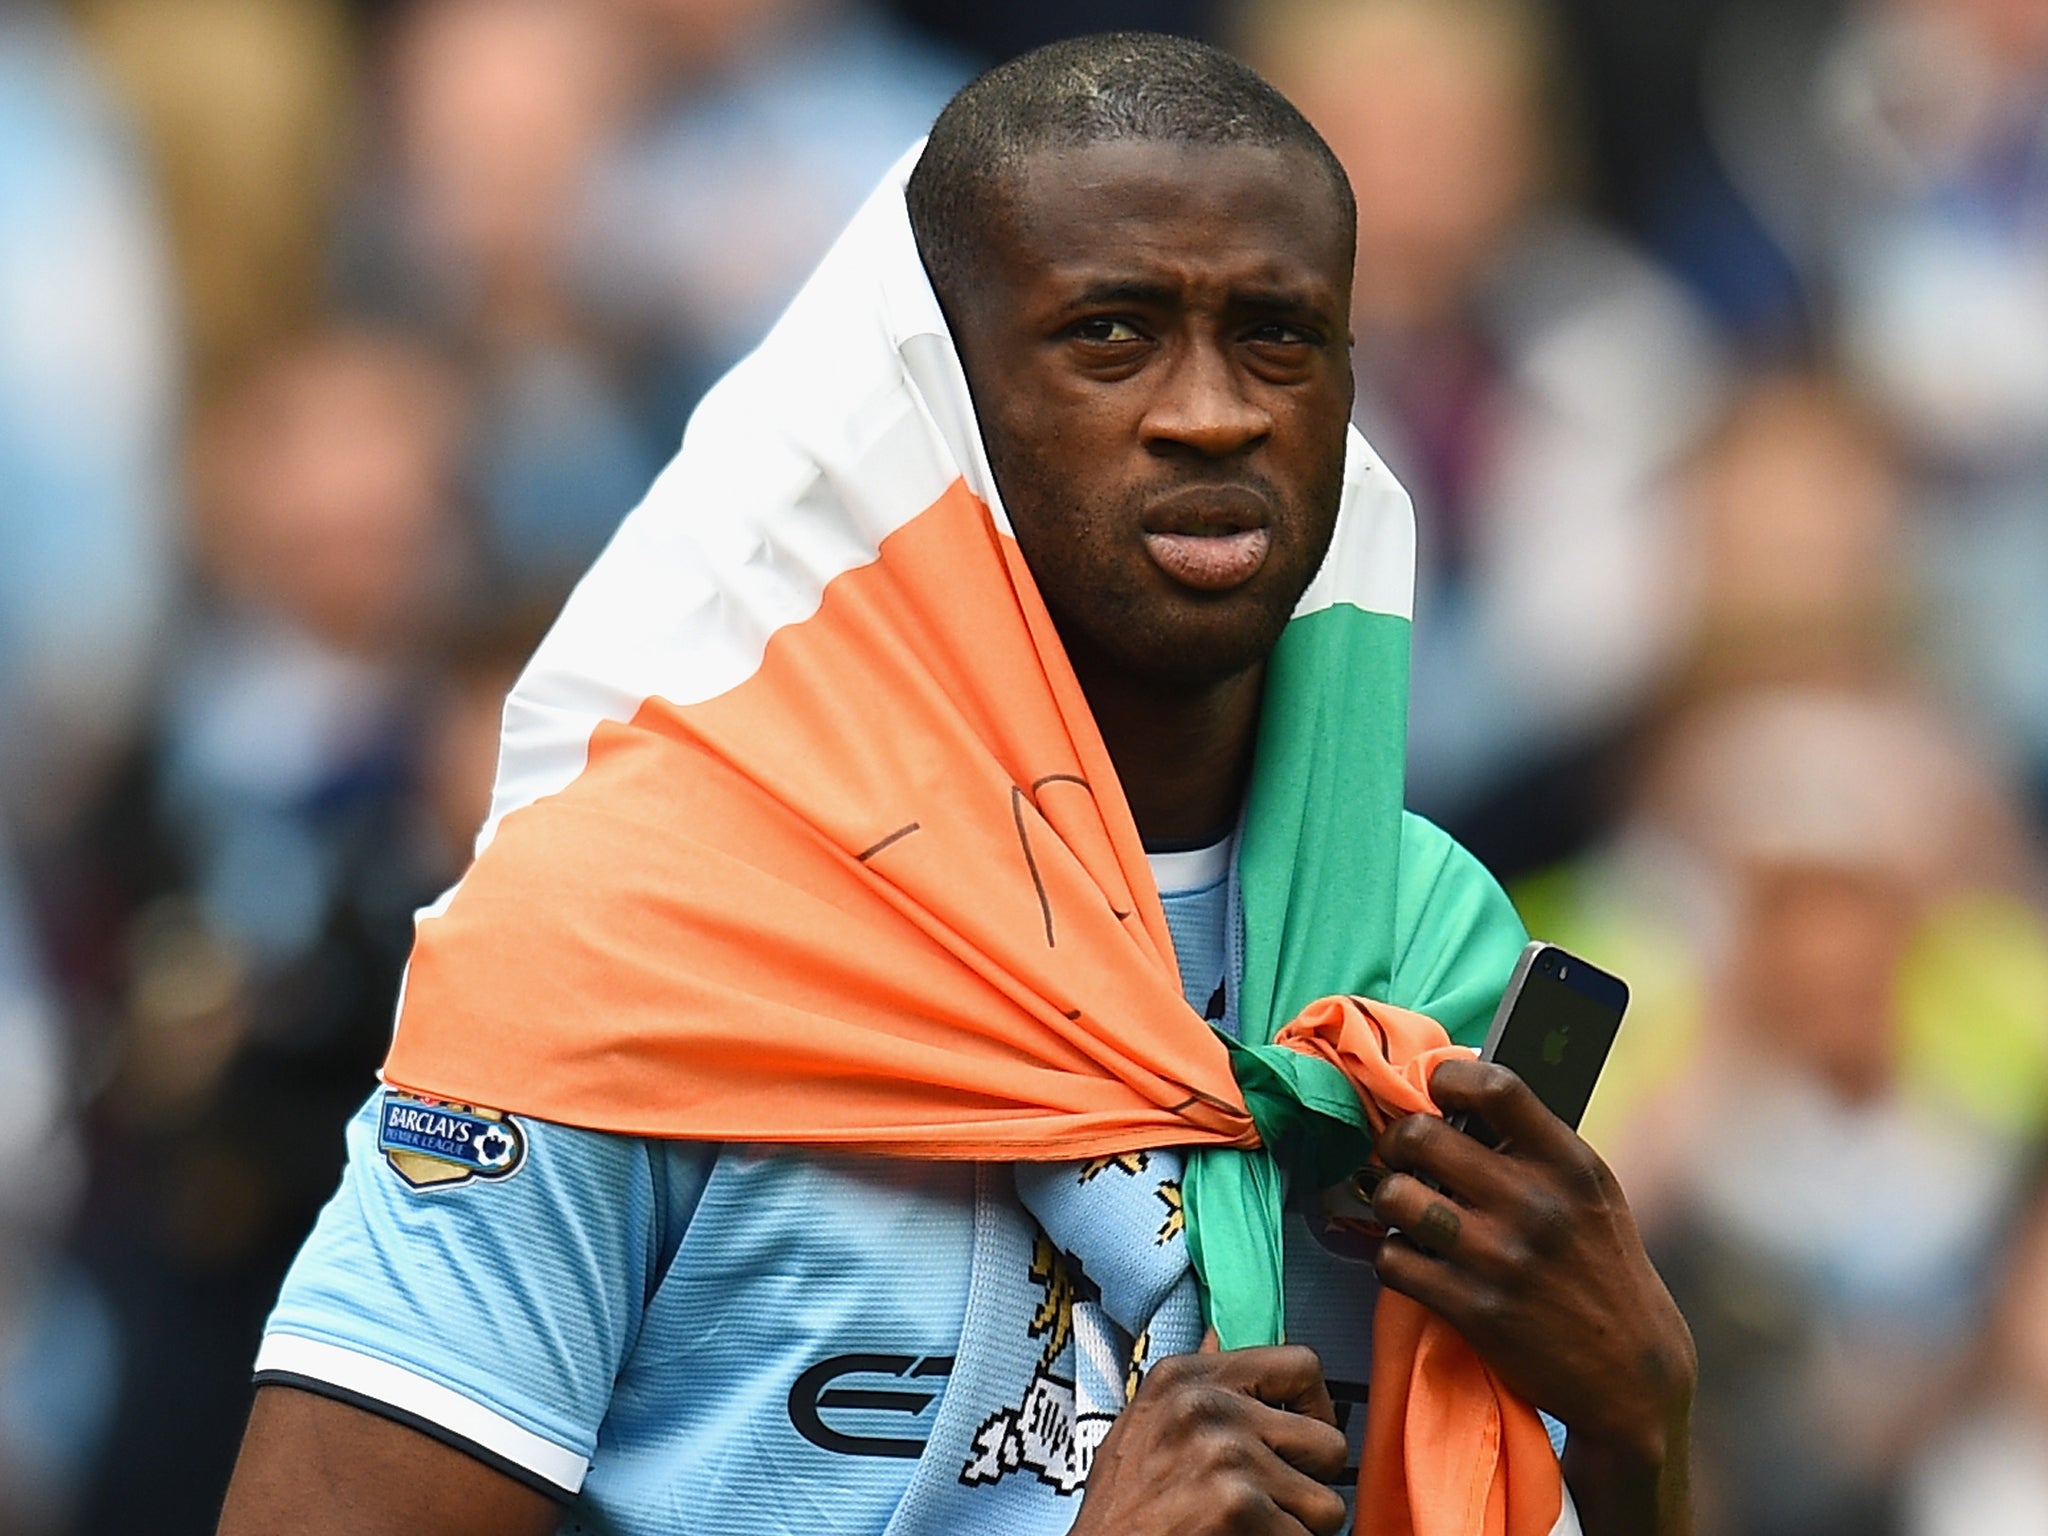 Yaya Touré delivered the league title to Manchester City’s owners, and were they grateful? Not enough for Yaya